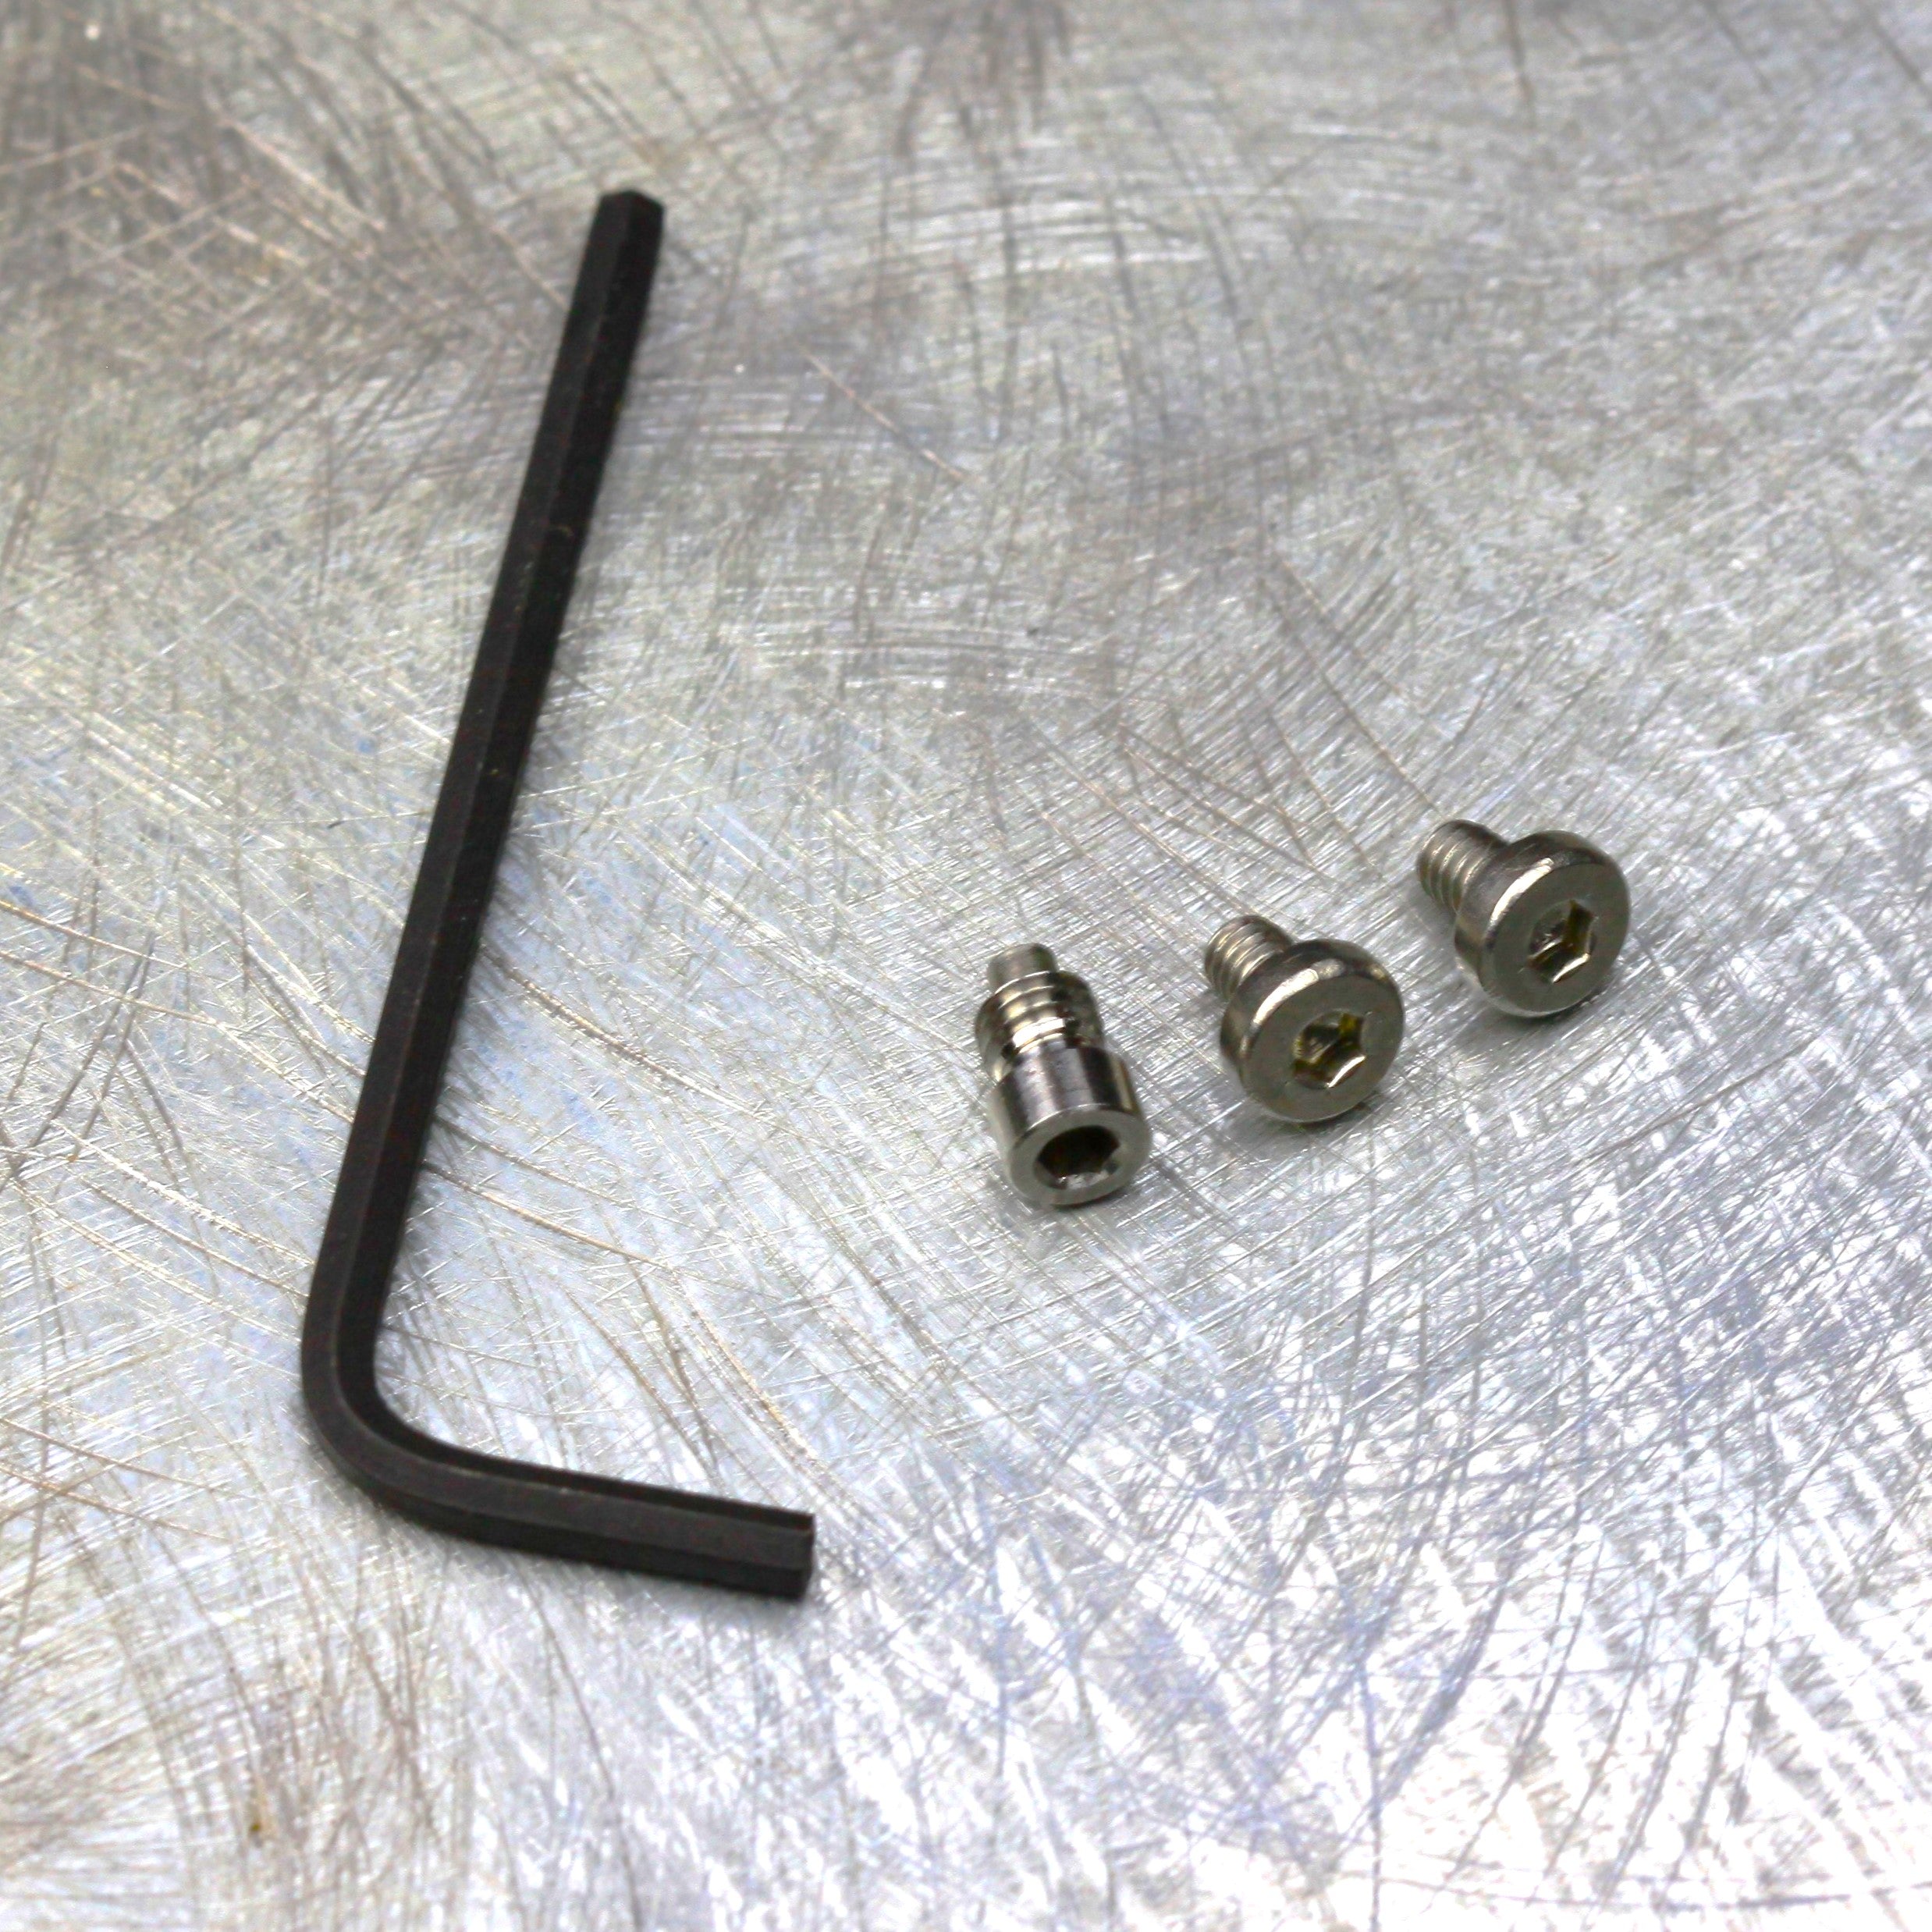 Kimber Revolver Replacement Side Plate Screws - Fits All Kimber Revolver Models